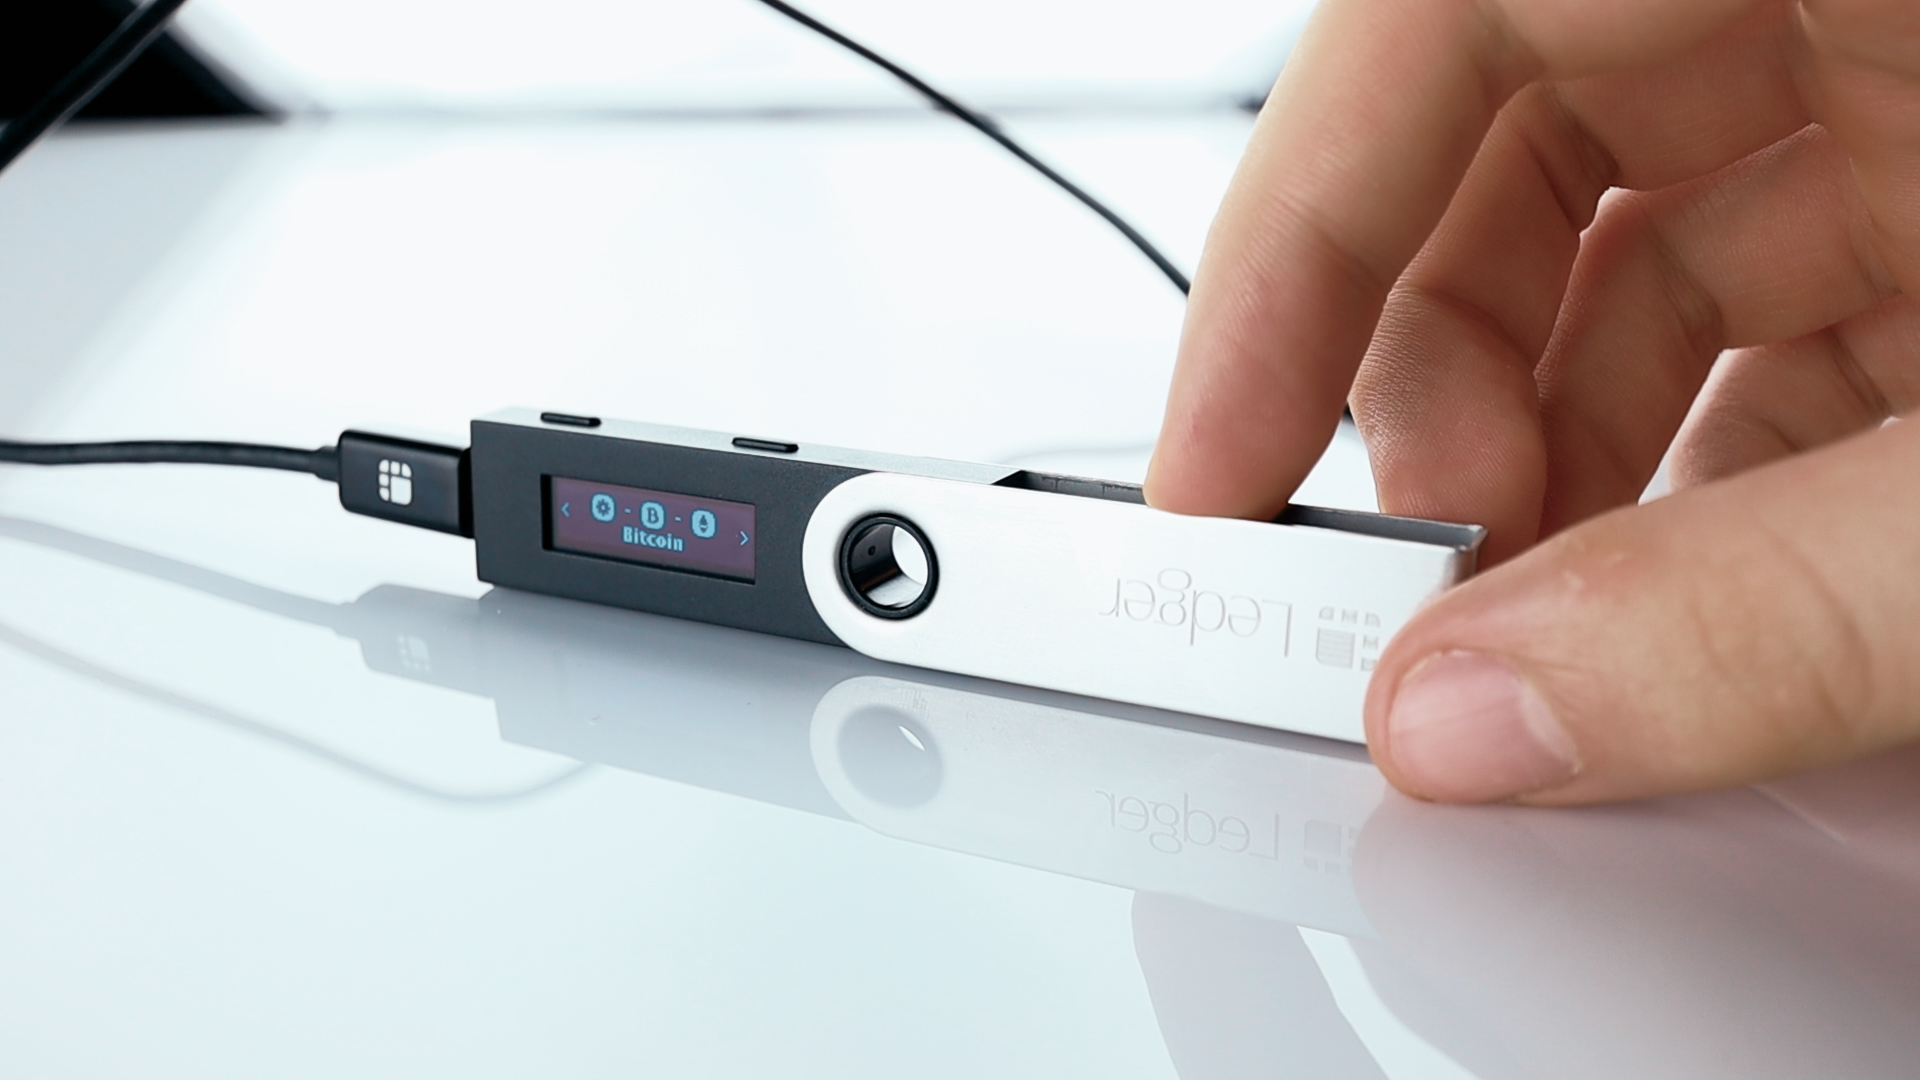 What Makes Ledger Nano S The Most Desirable Hardware Wallet In 2021? post thumbnail image